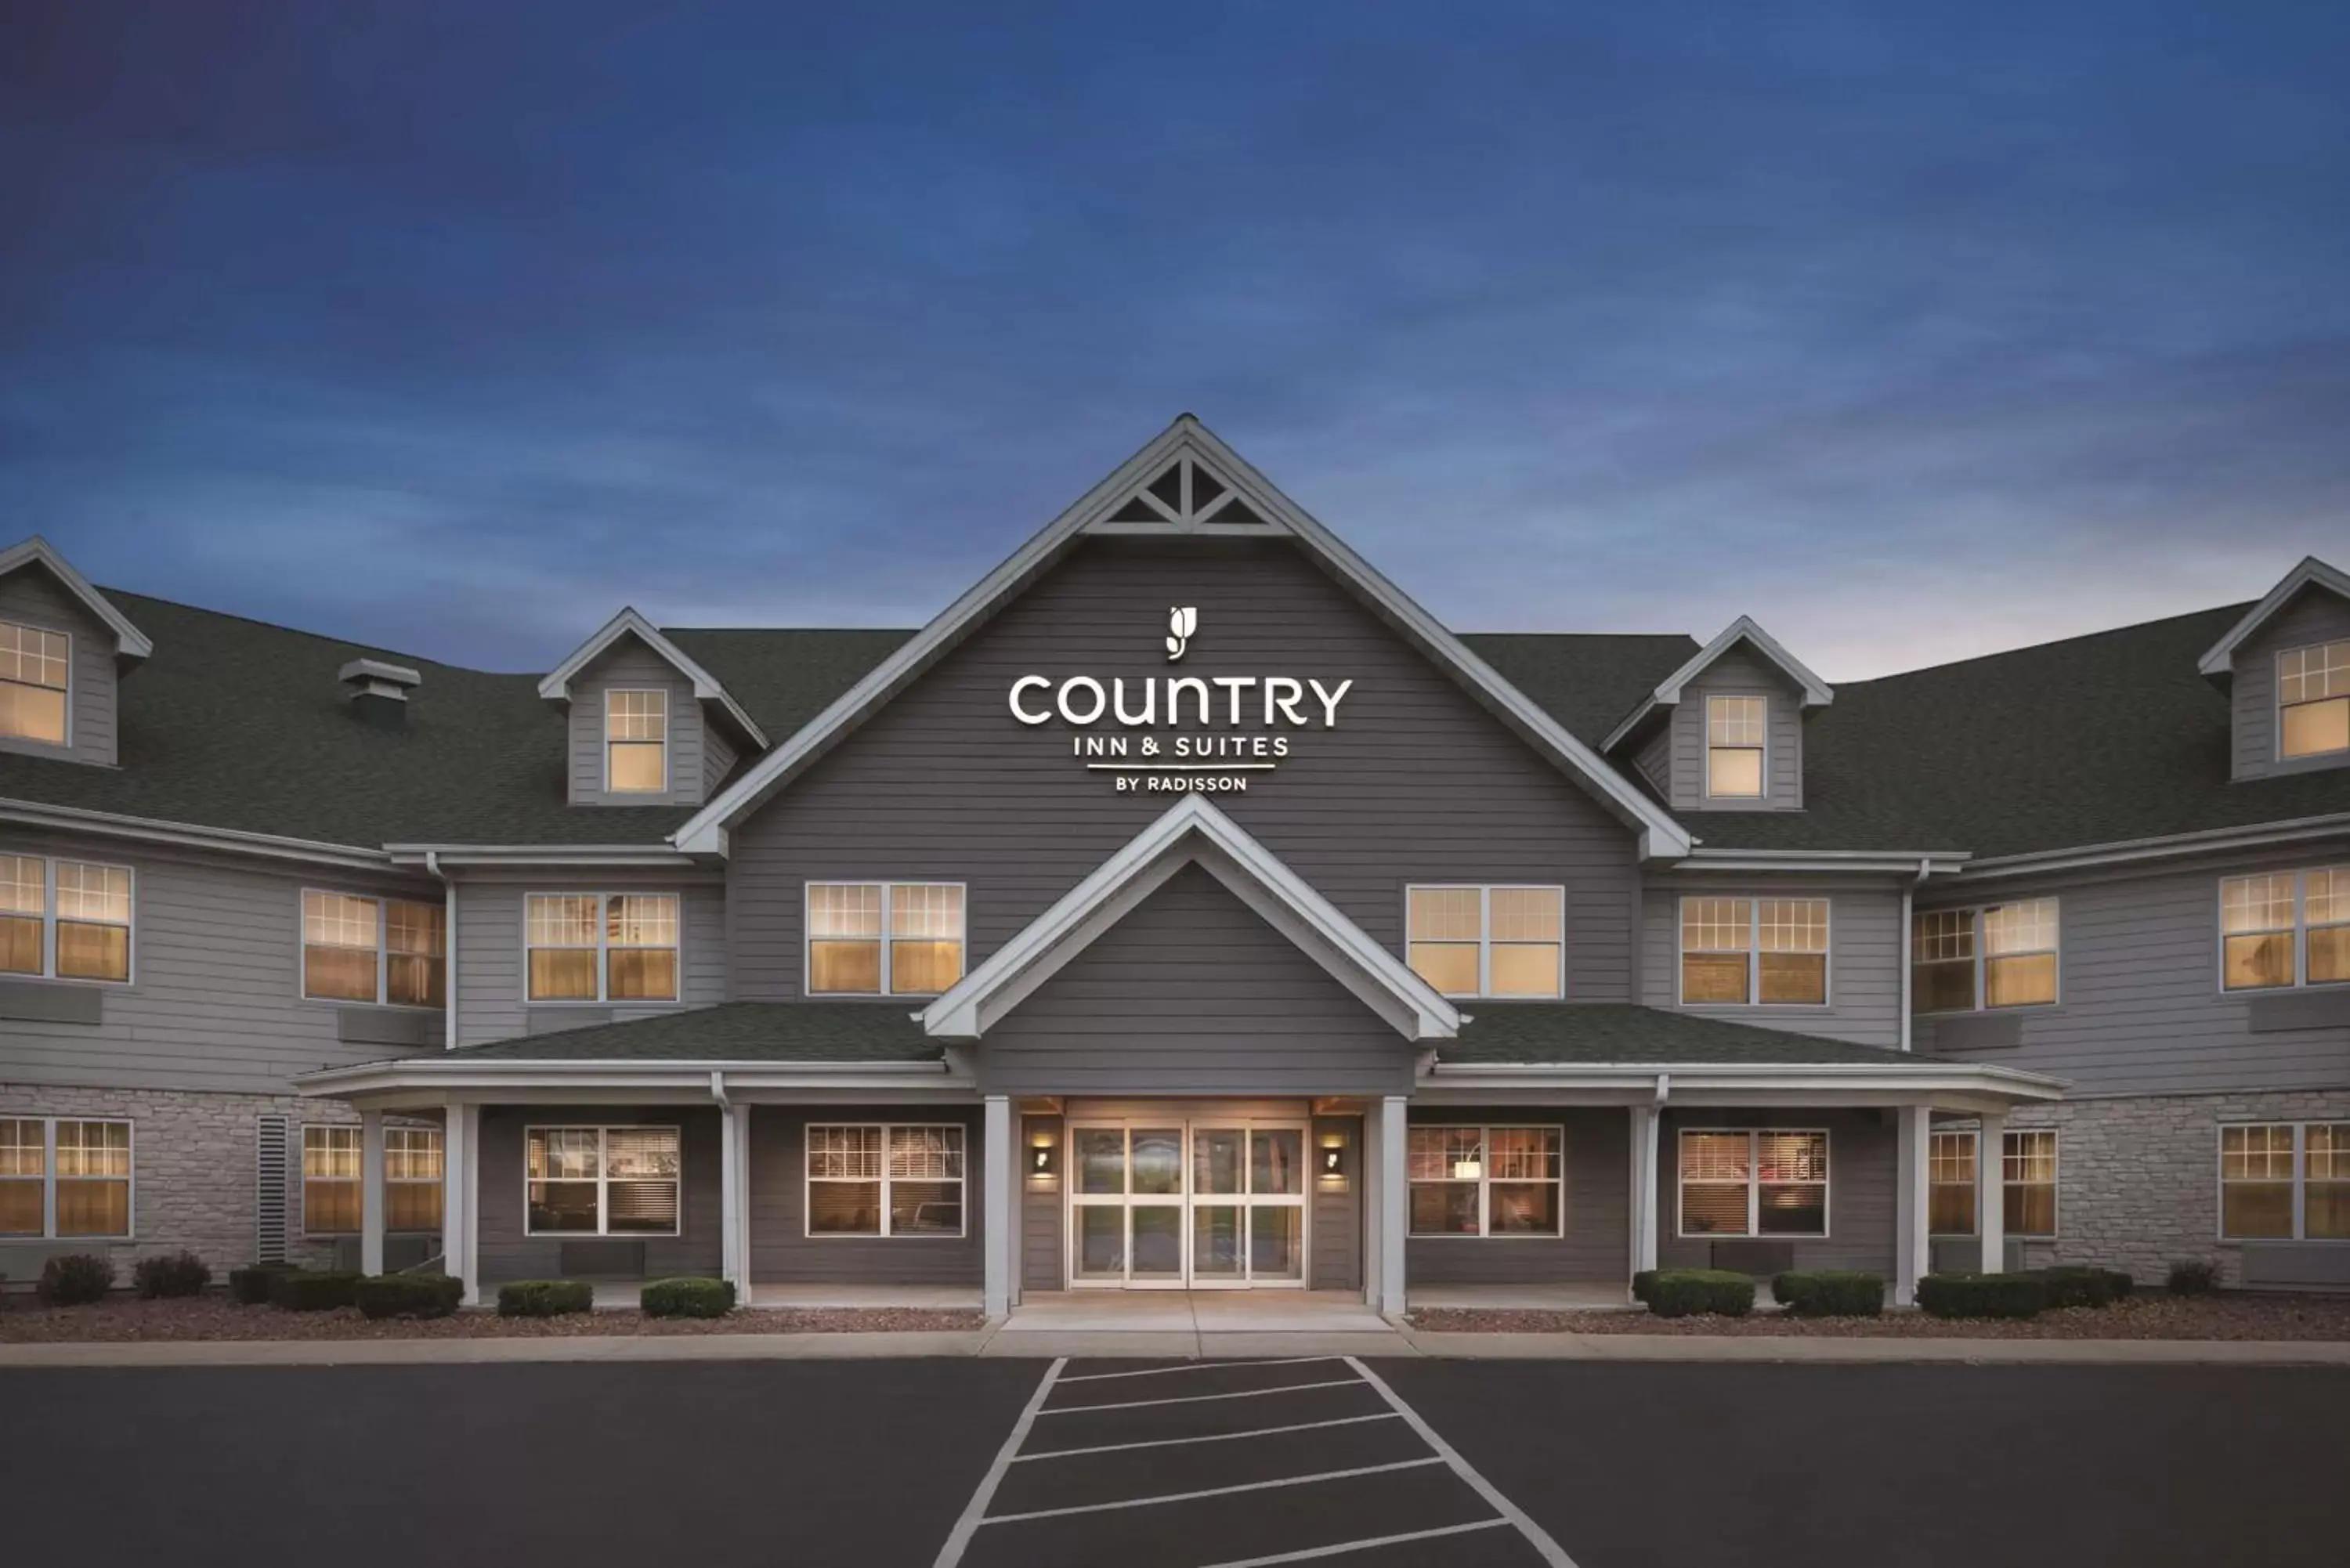 Property building in Country Inn & Suites by Radisson, Germantown, WI